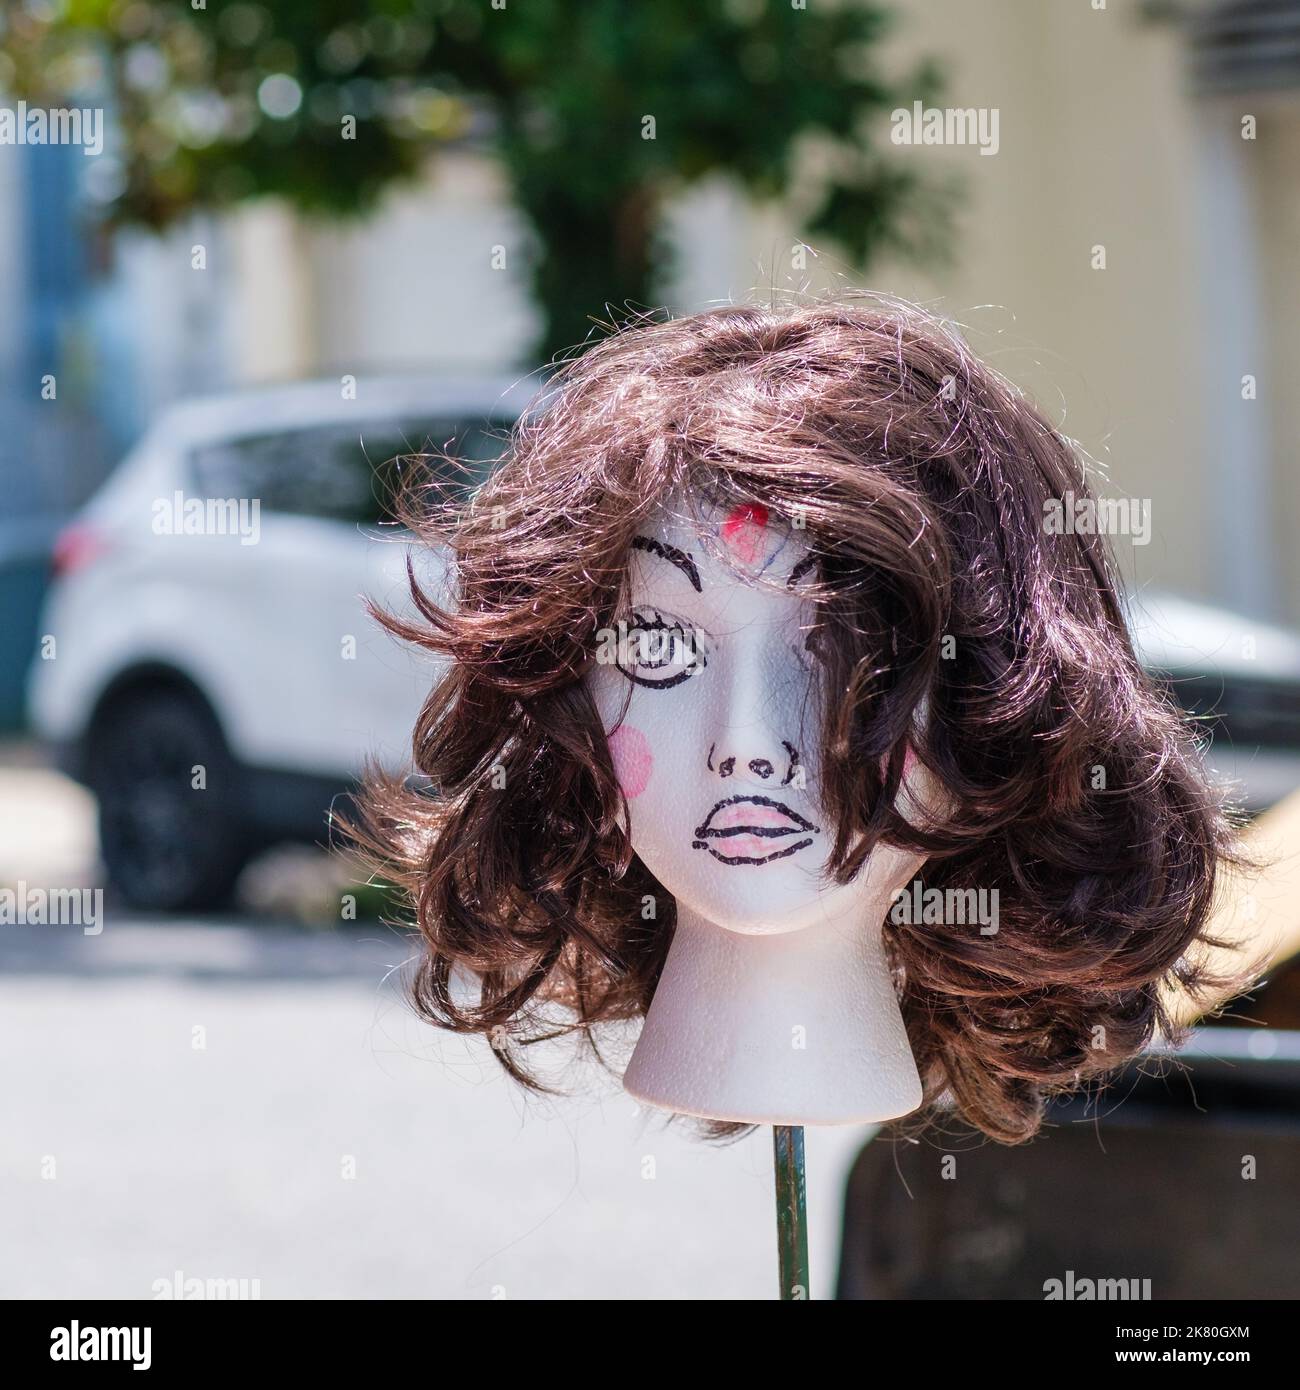 20+ Foam Wig Head Stock Photos, Pictures & Royalty-Free Images - iStock